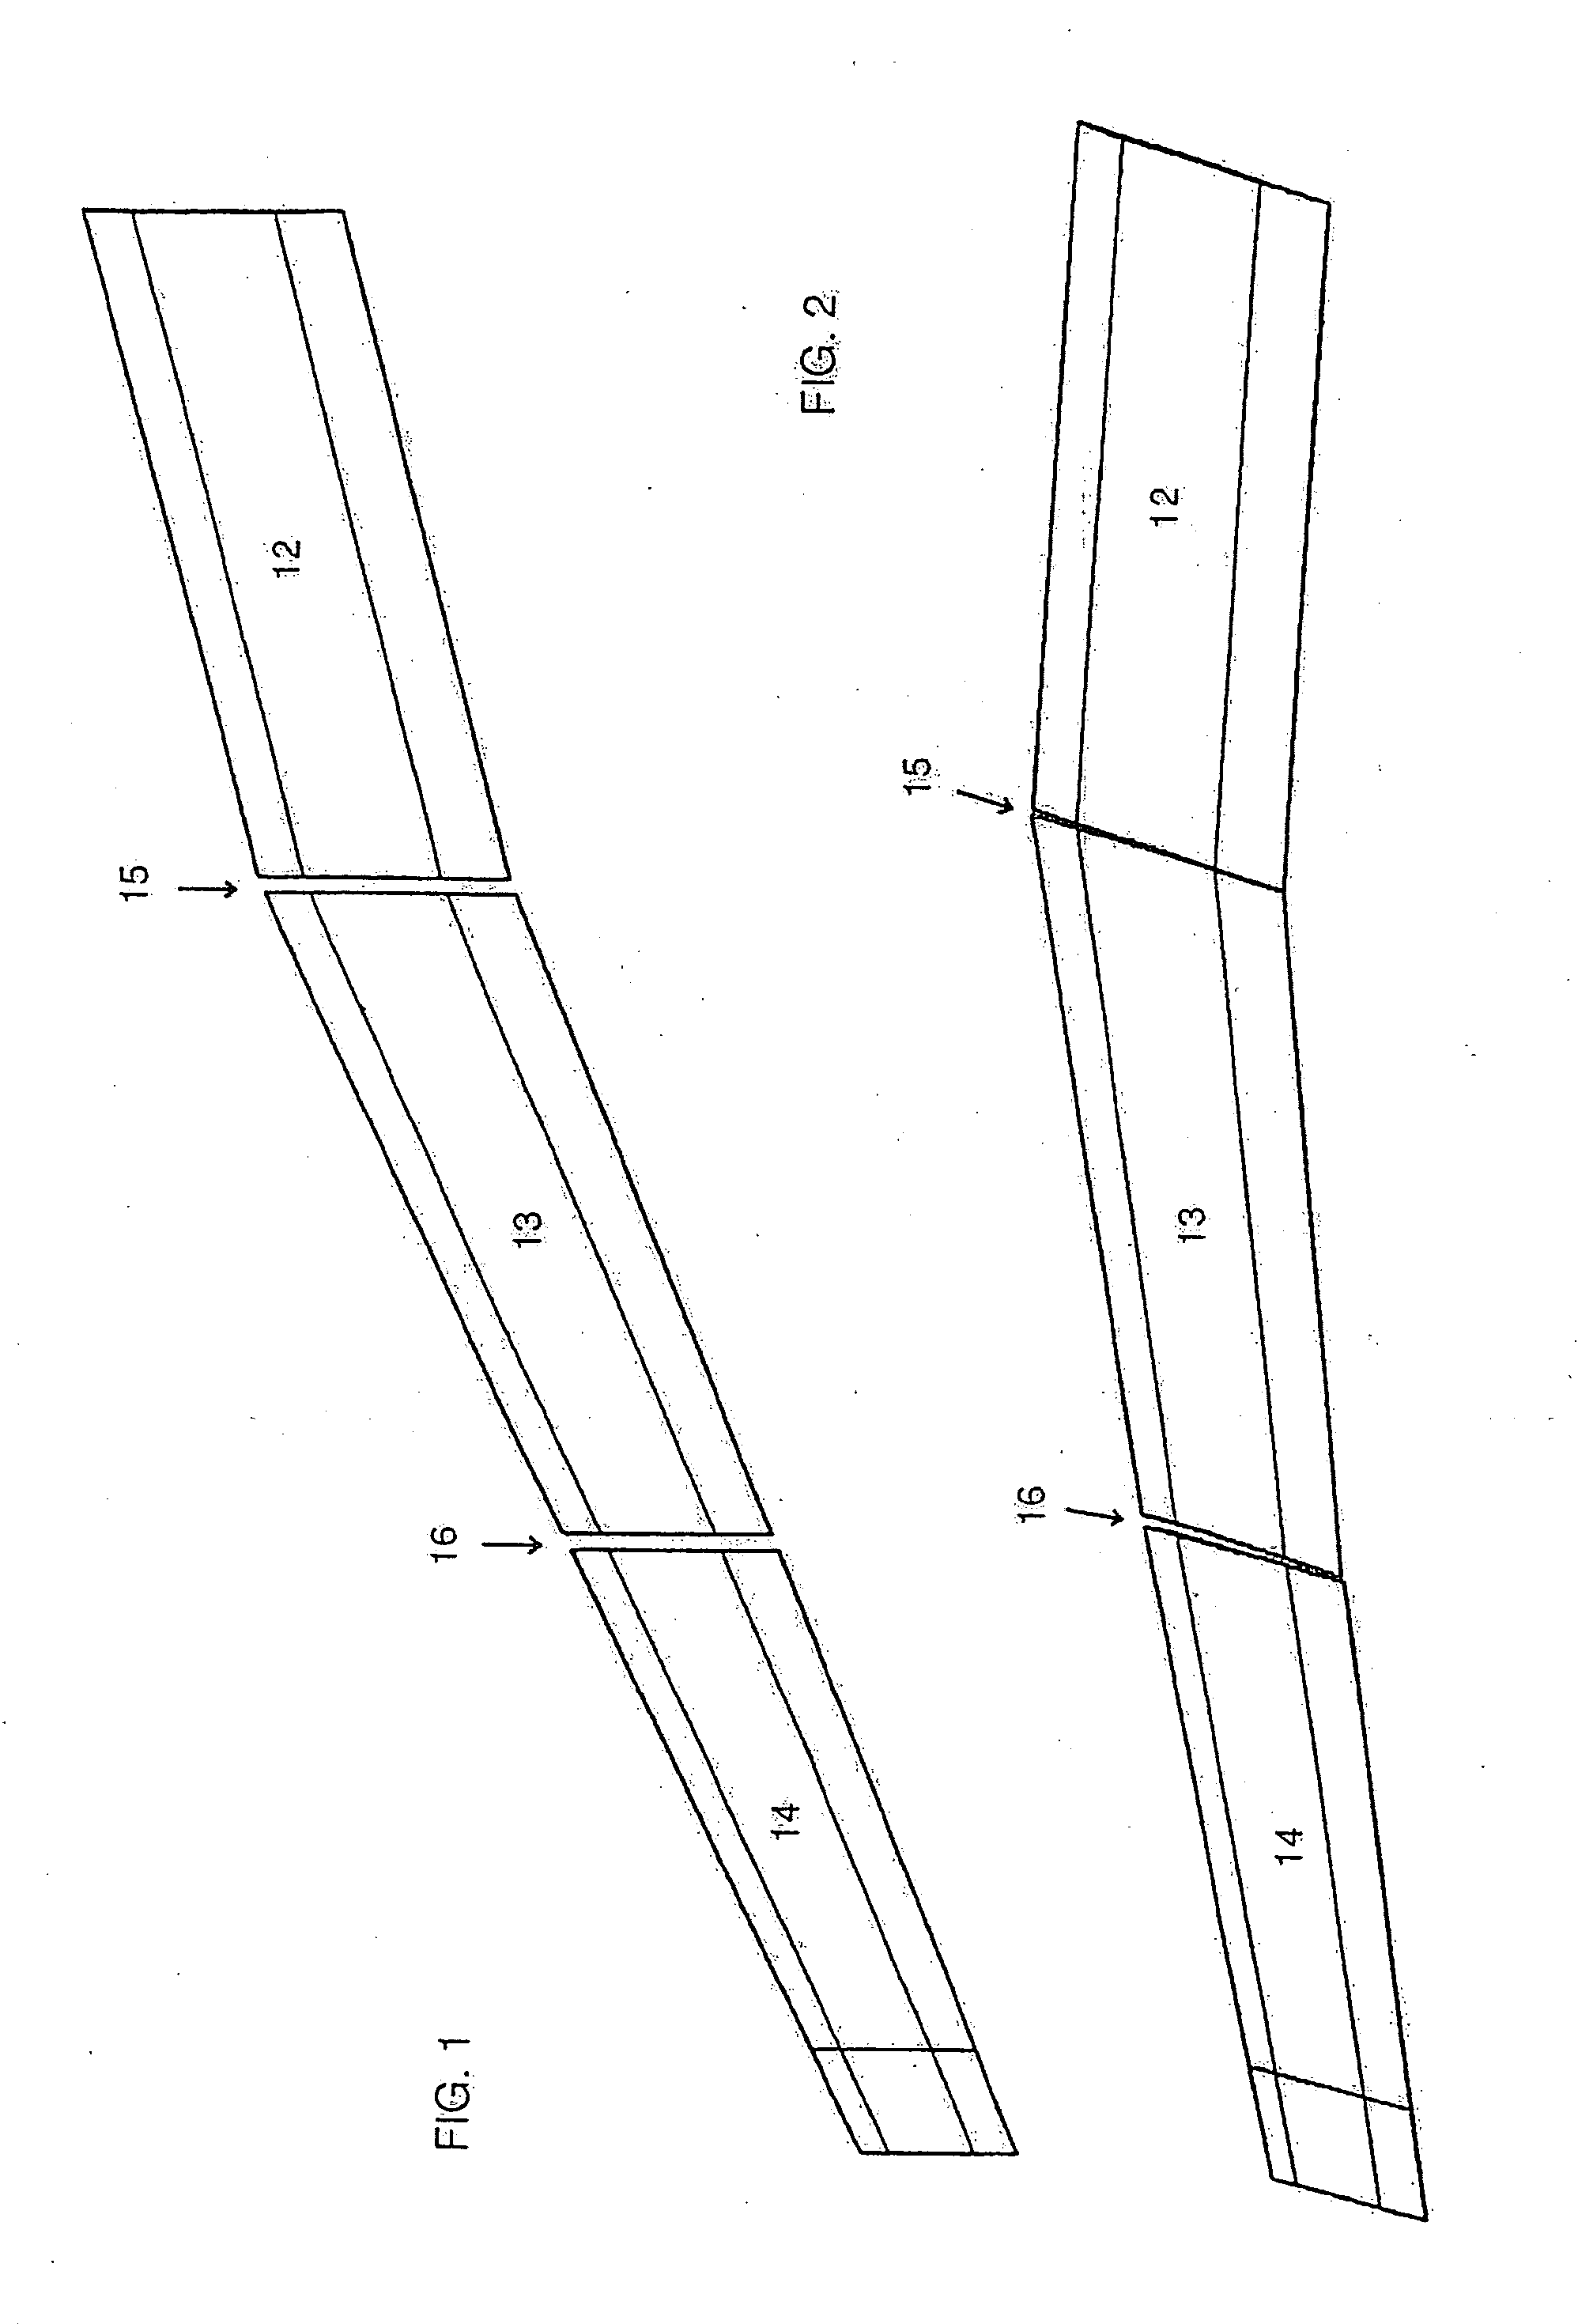 Flap interconnection system for aircraft